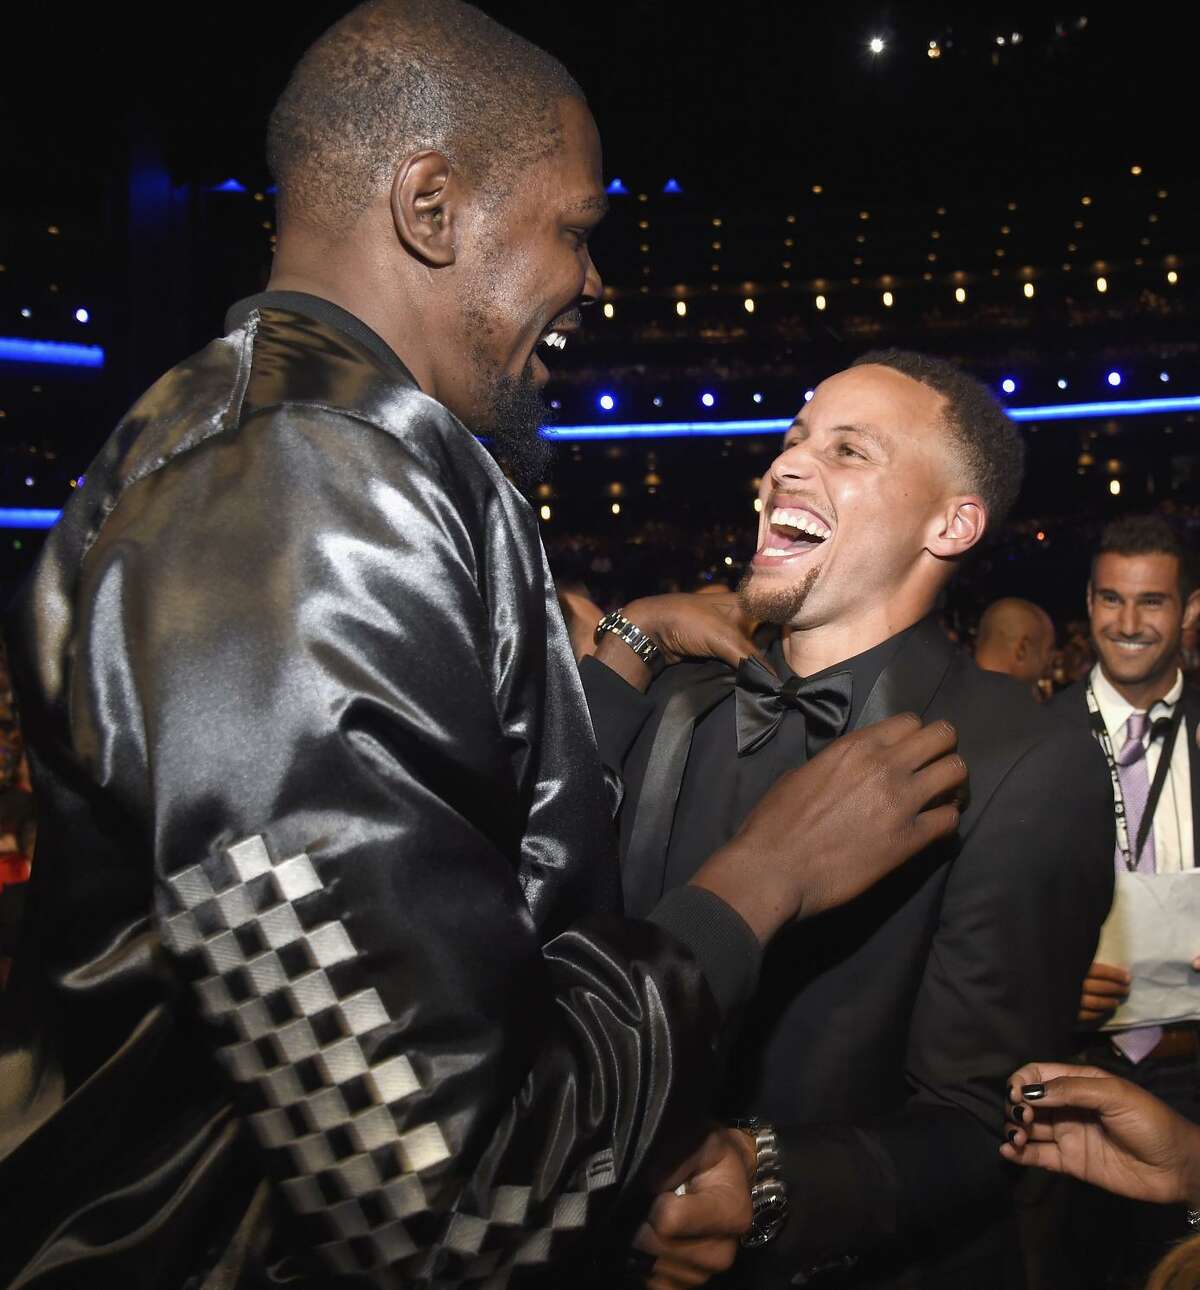 Warriors Kevin Durant (left) and Stephen Curry enjoy themselves at last week’s ESPYs. The Warriors were honored as best team, and Durant won for best championship performance.